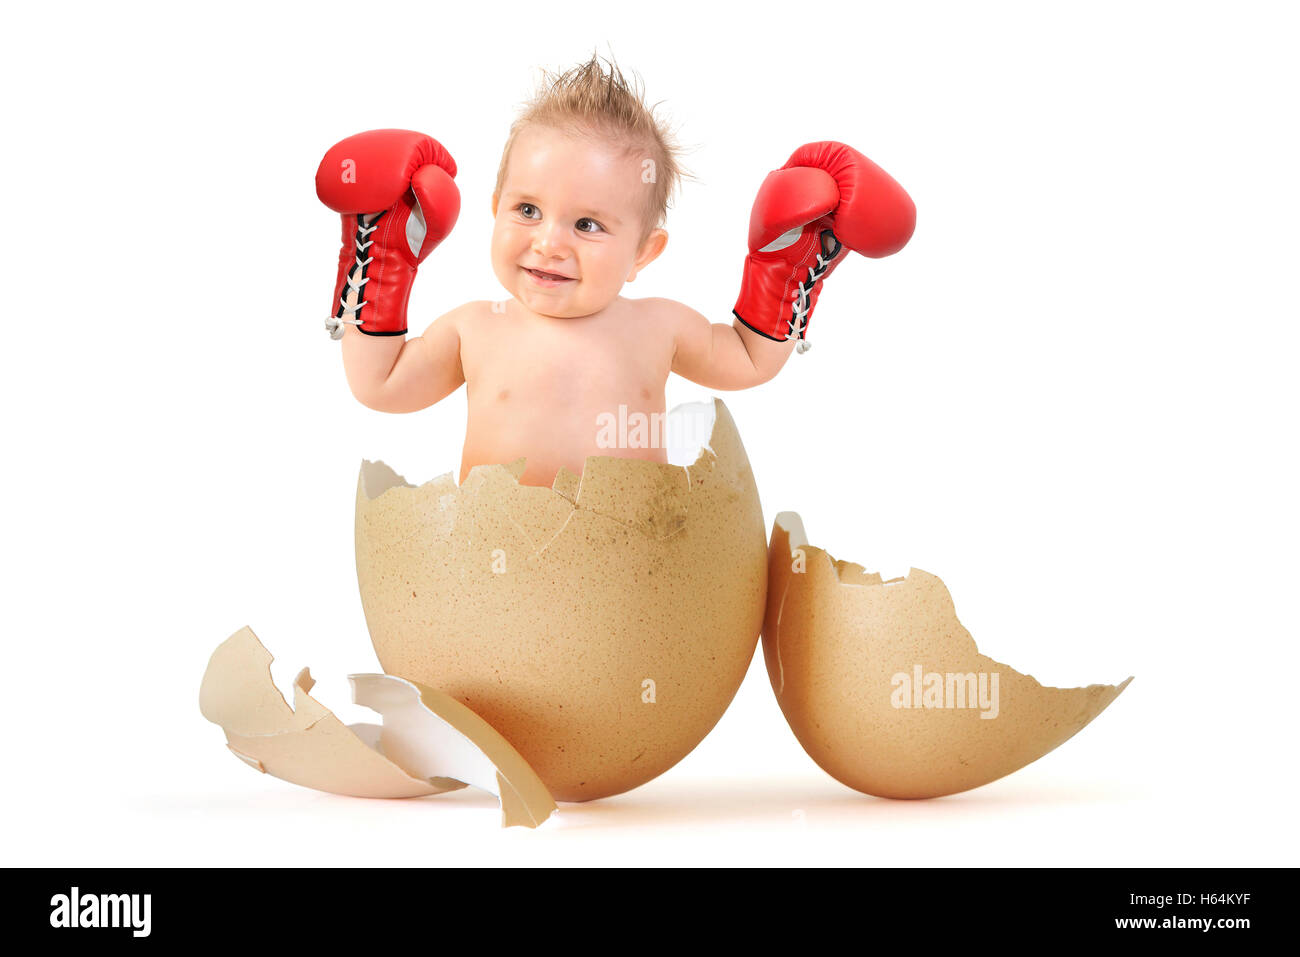 Beautiful baby boy with boxing gloves breaking the egg Stock Photo - Alamy